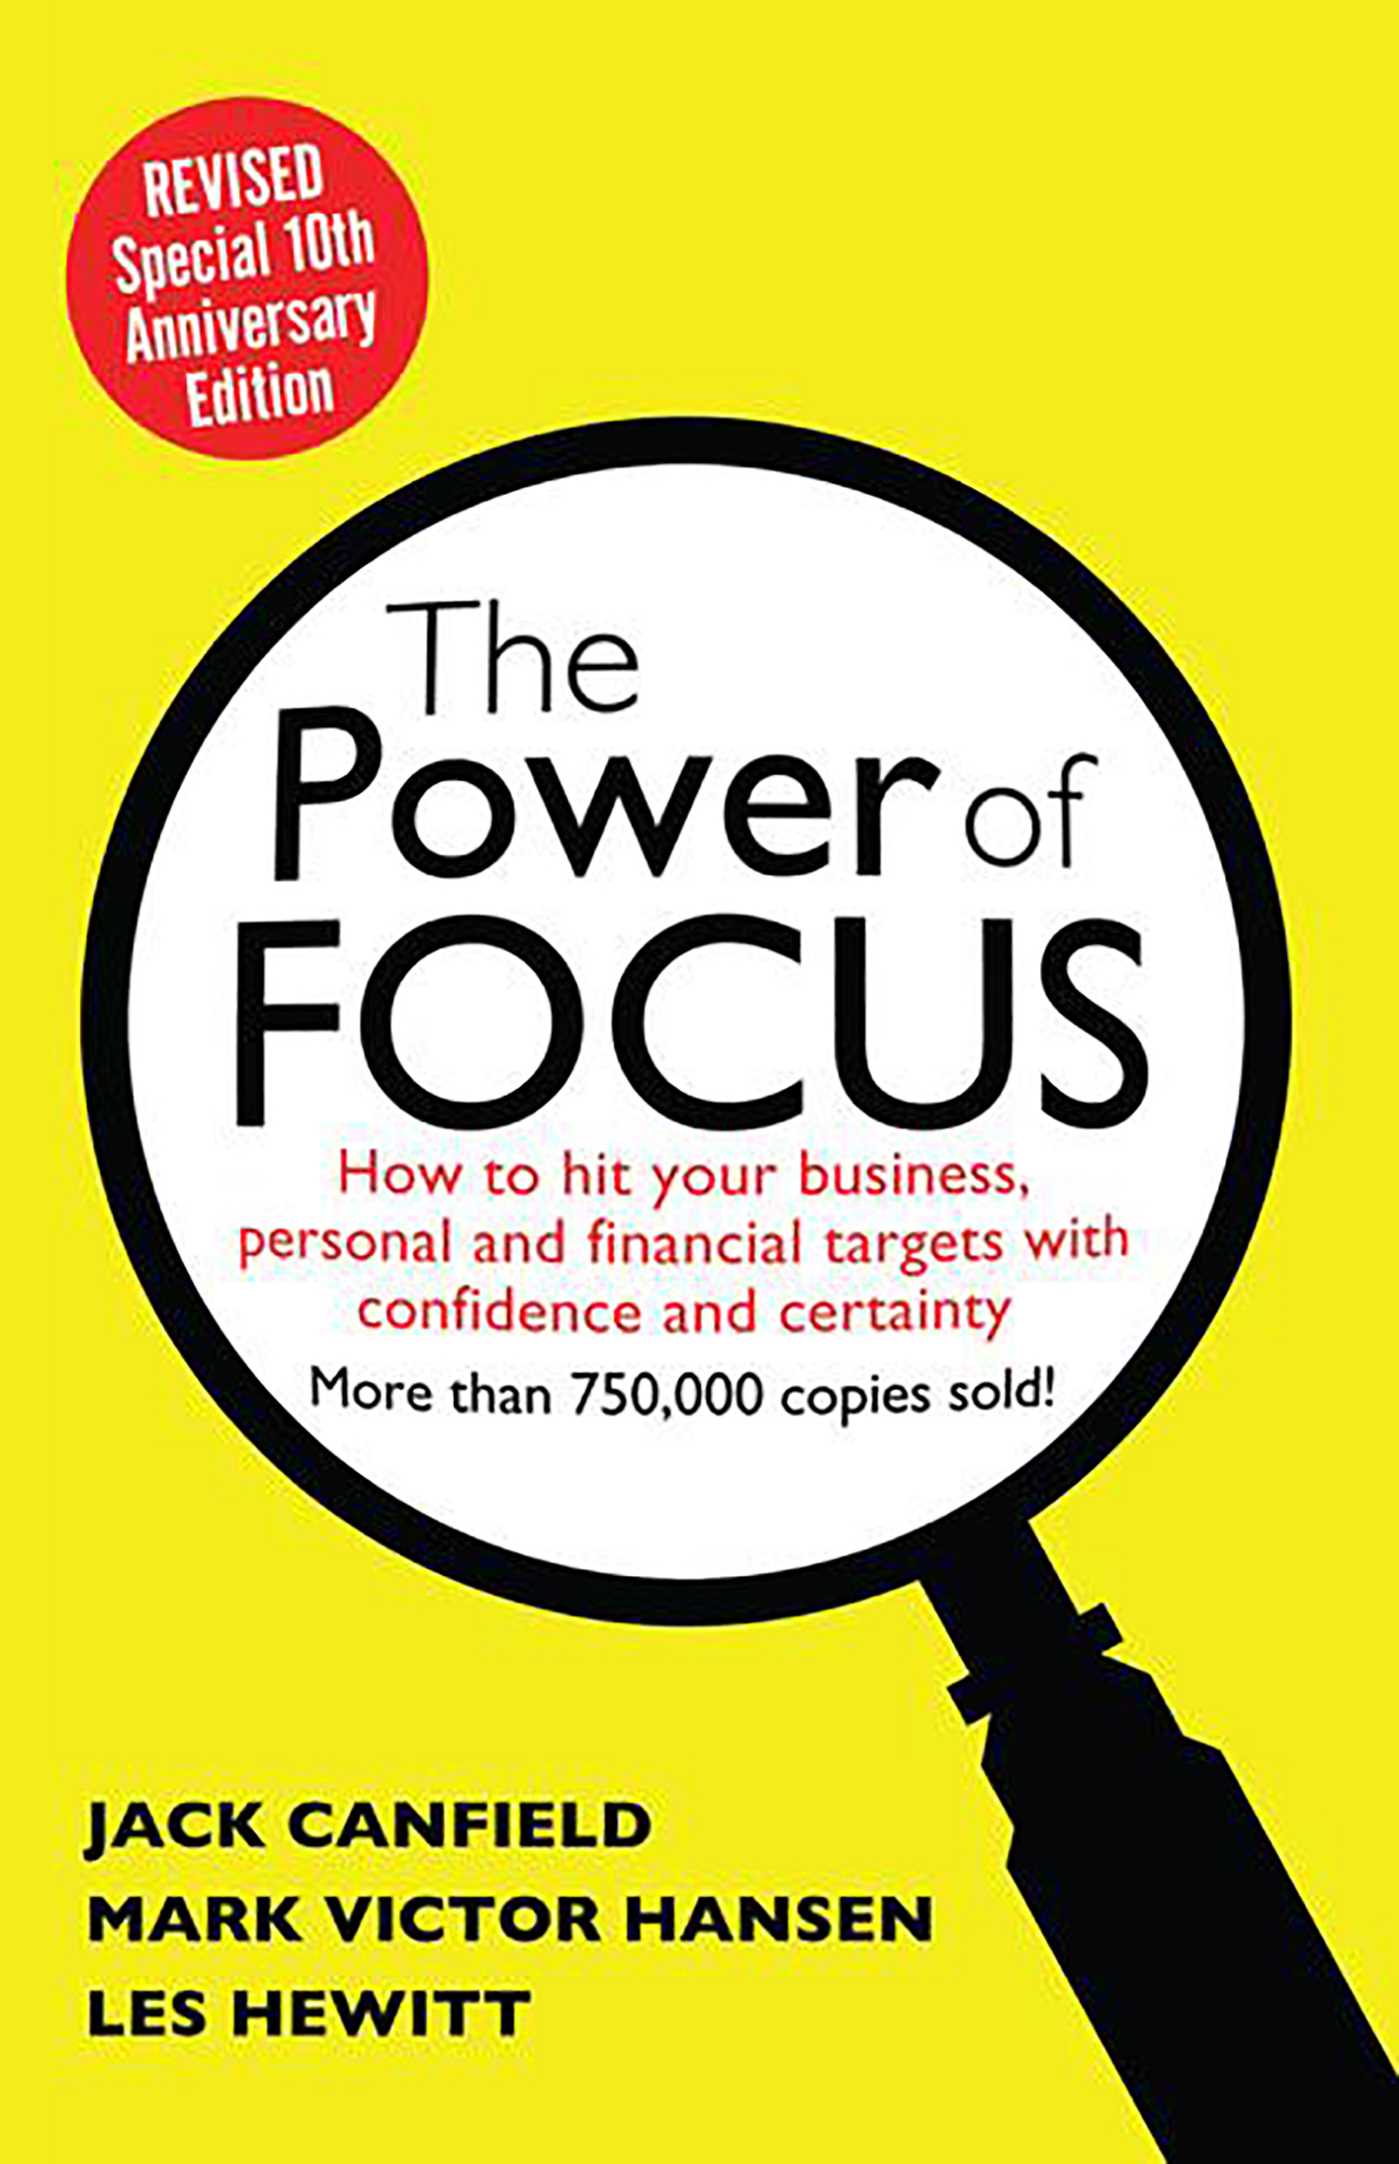 Power of Focus Tenth Anniversary Edition (The) : How to Hit Your Business, Personal and Financial Targets with Absolute Confidence and Certainty | Canfield, Jack